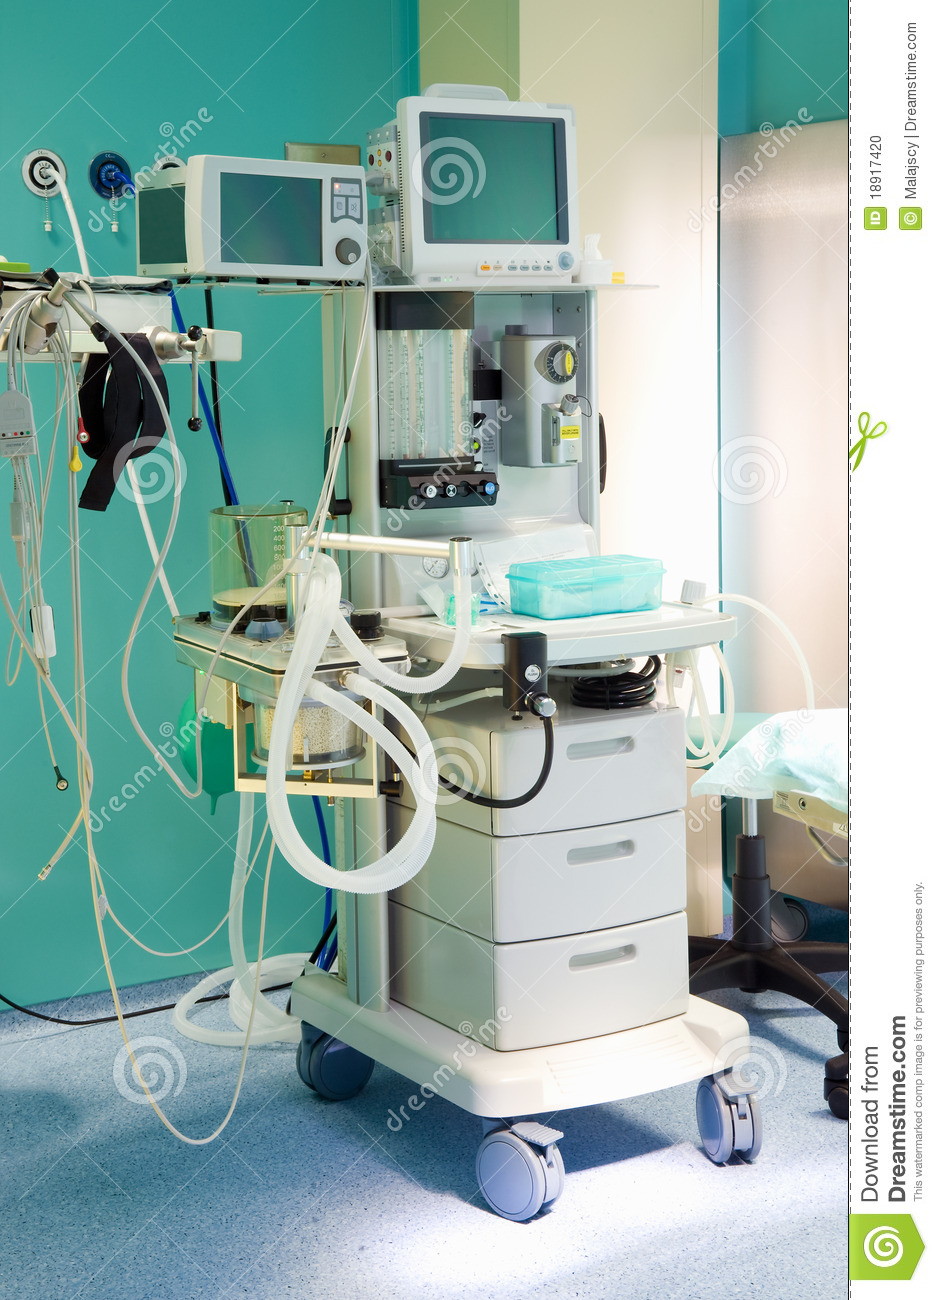 More Similar Stock Images Of   Hospital   Anesthesiology Equipment  